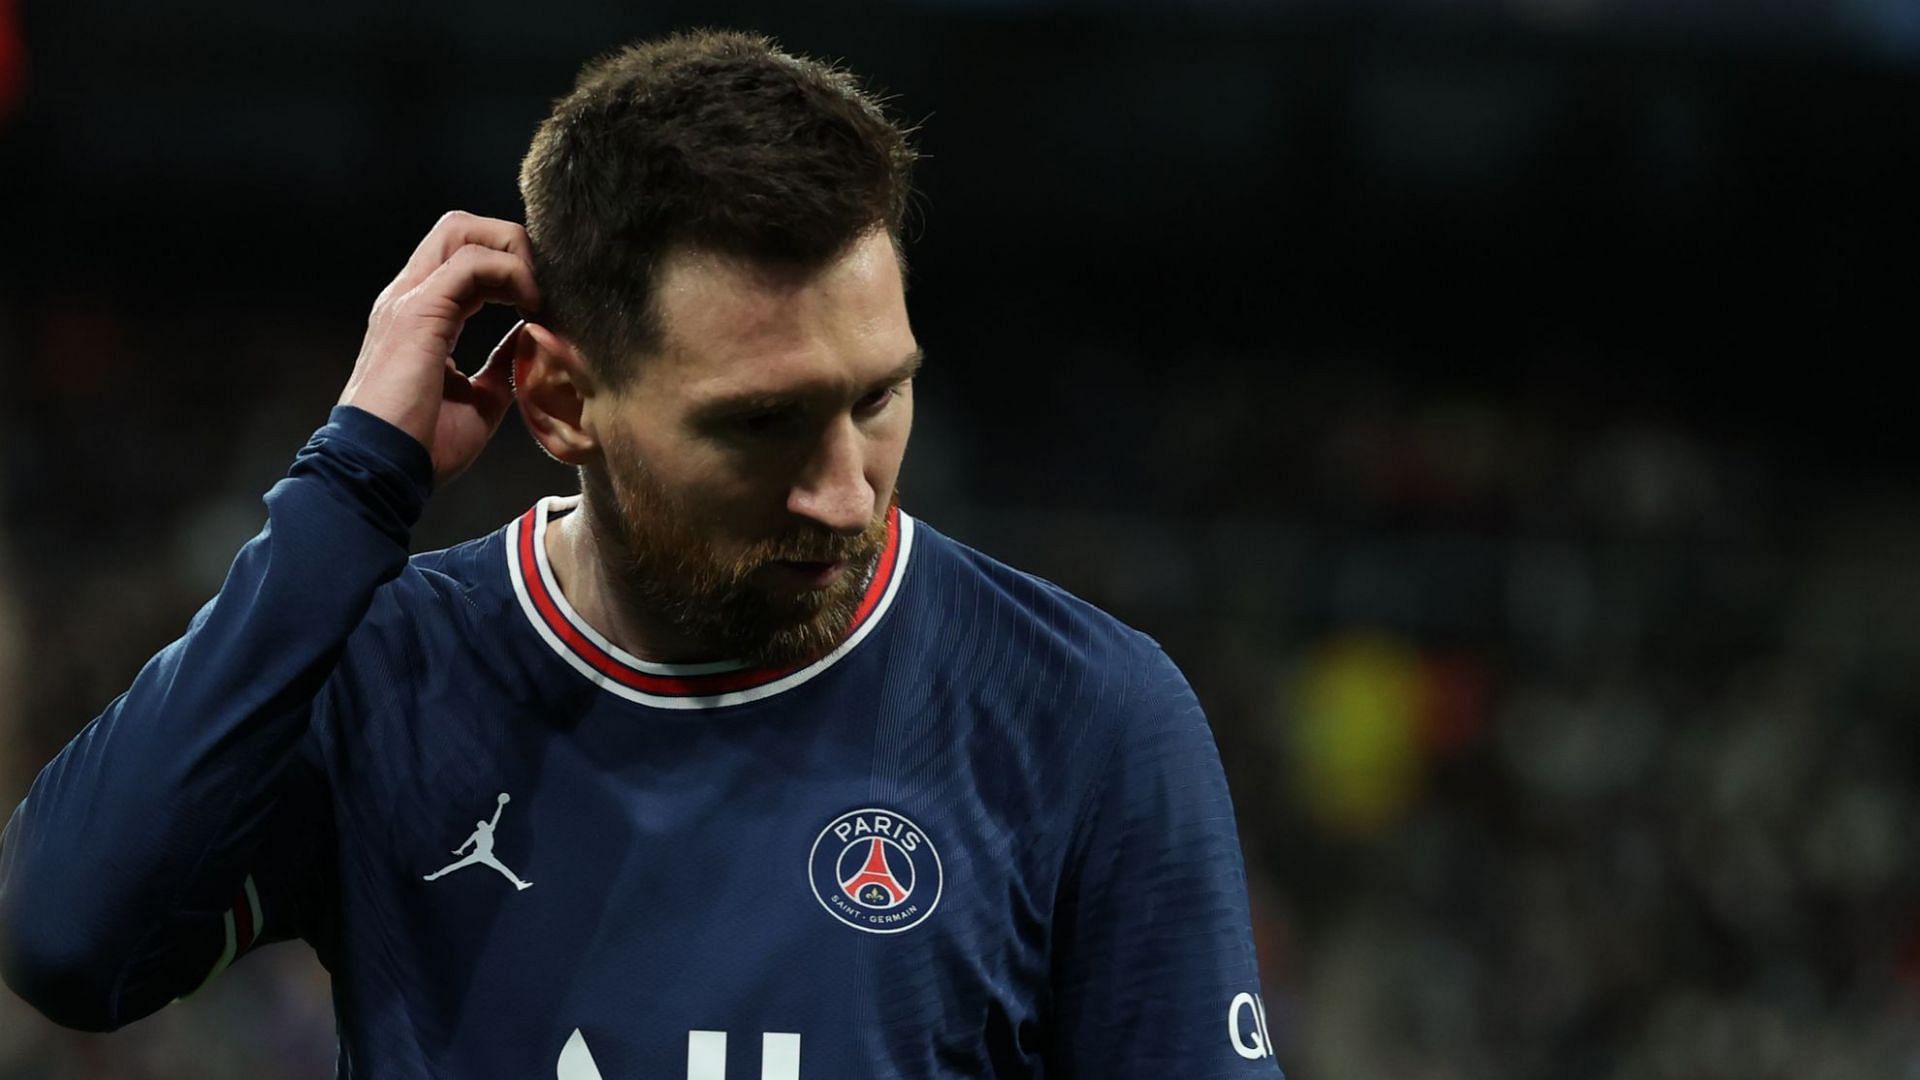 Lionel Messi has struggled to find form at the French club